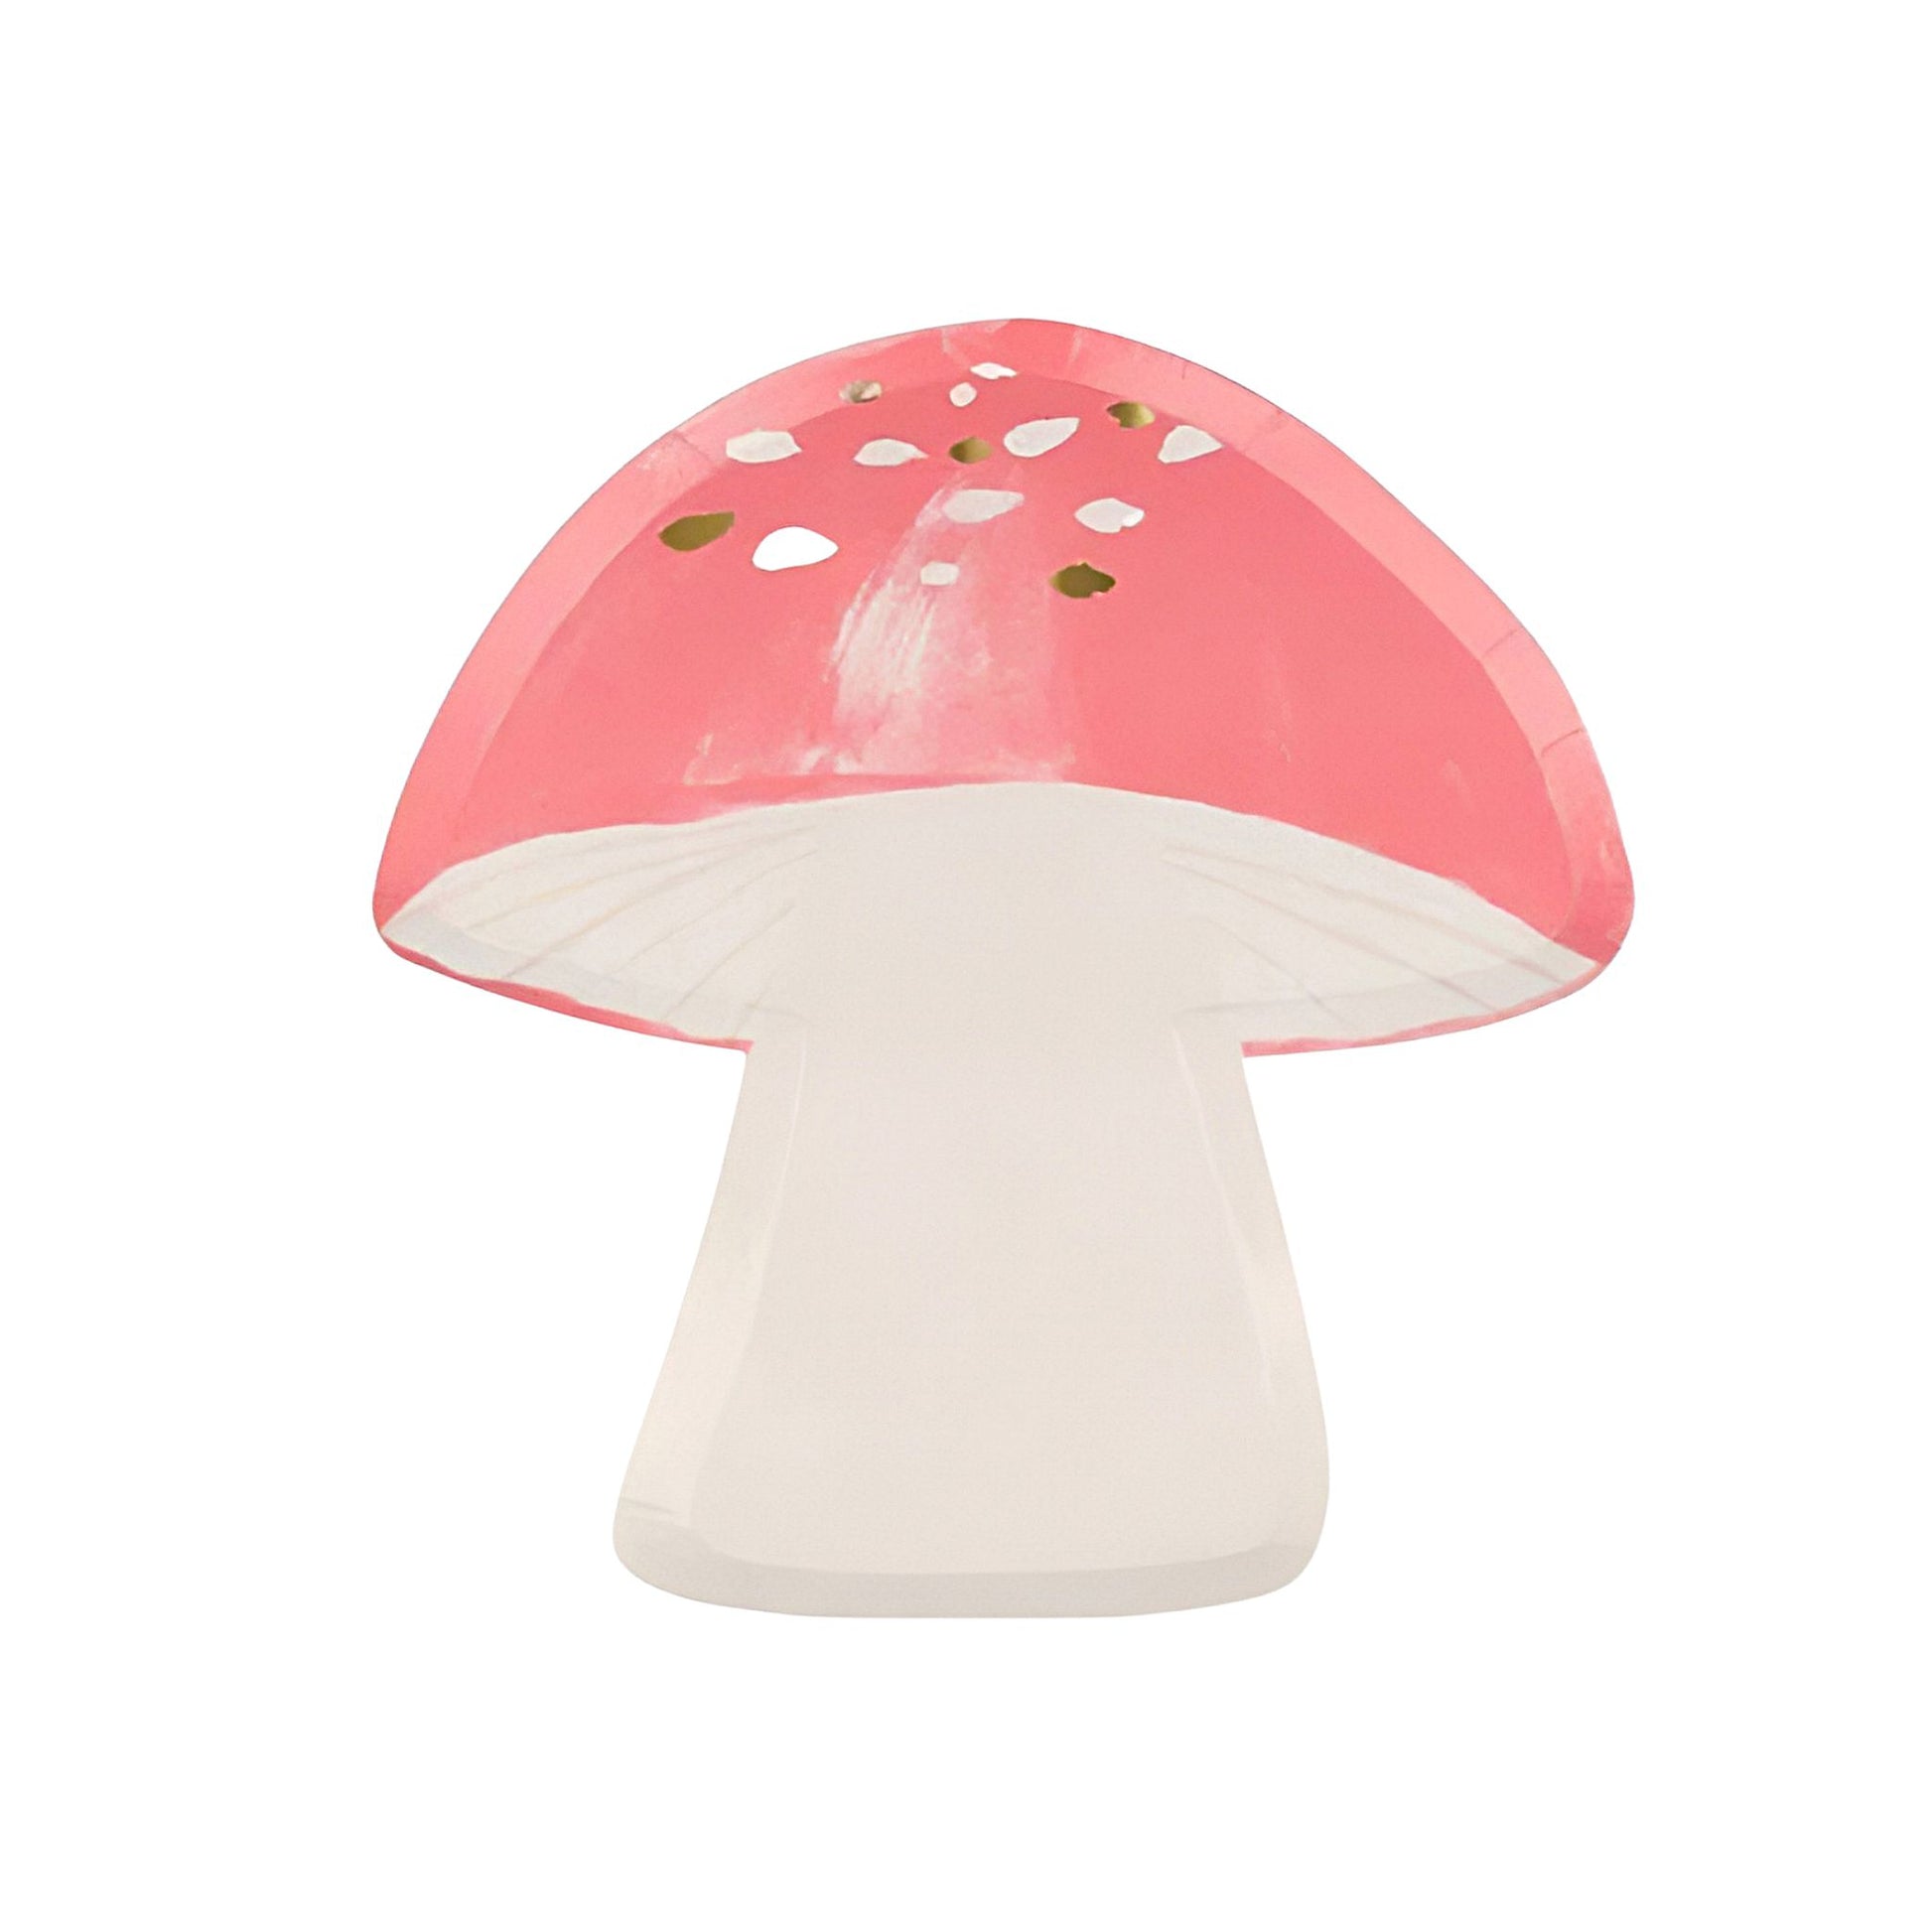 Red toadstool shaped plate by Meri Meri. White base and red top. 21cm.